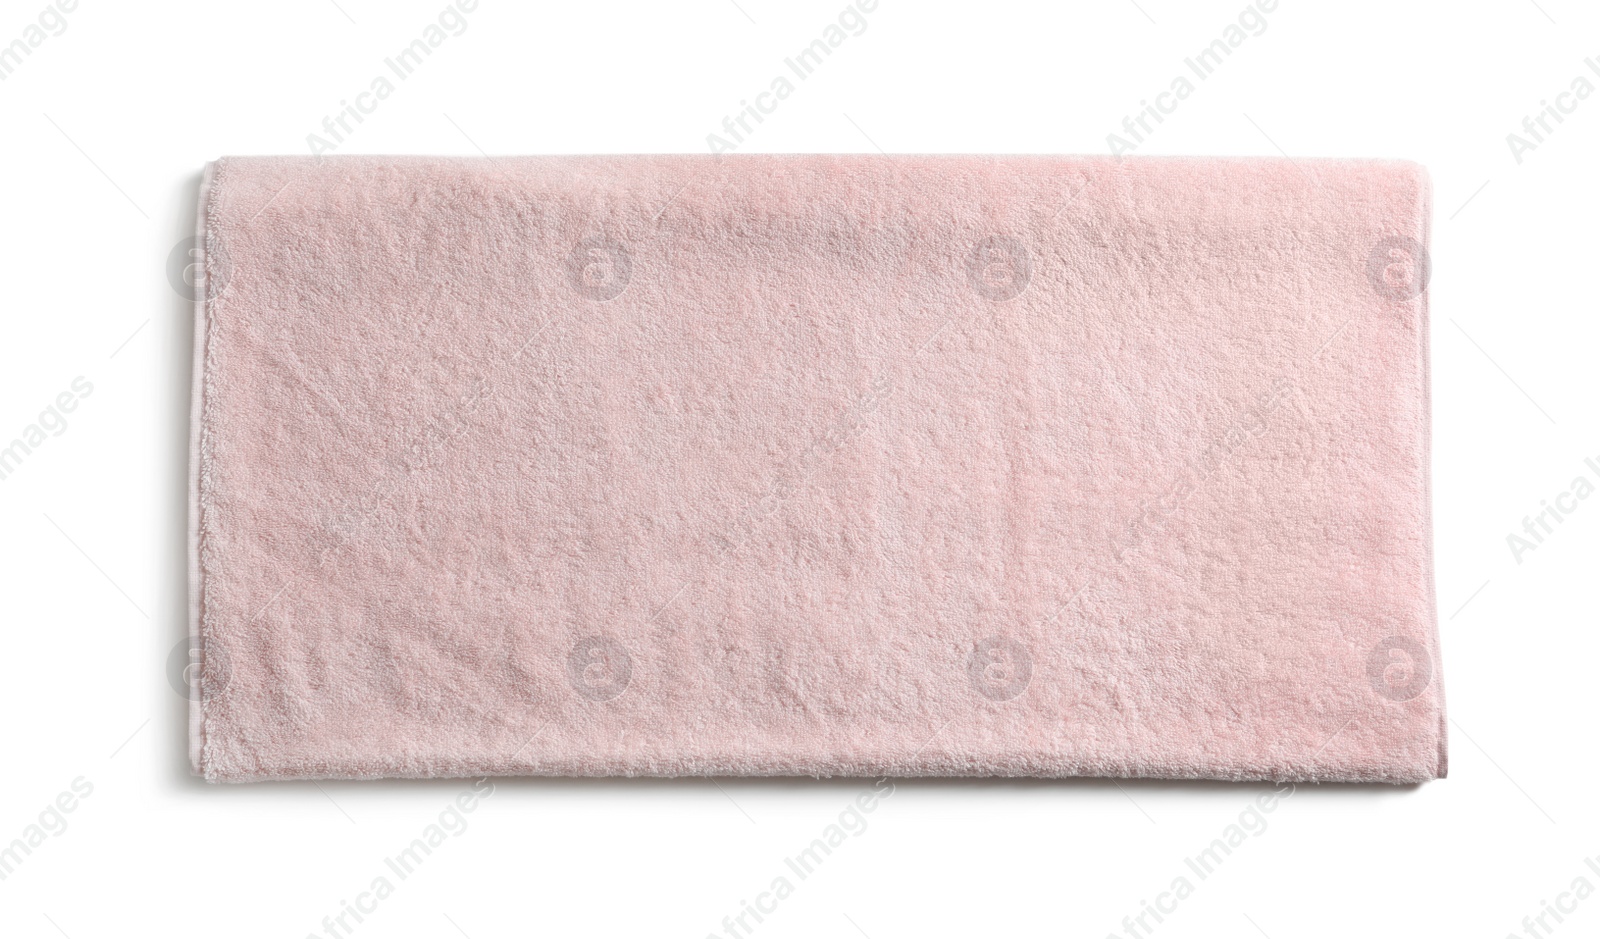 Photo of Folded soft terry towel on white background, top view